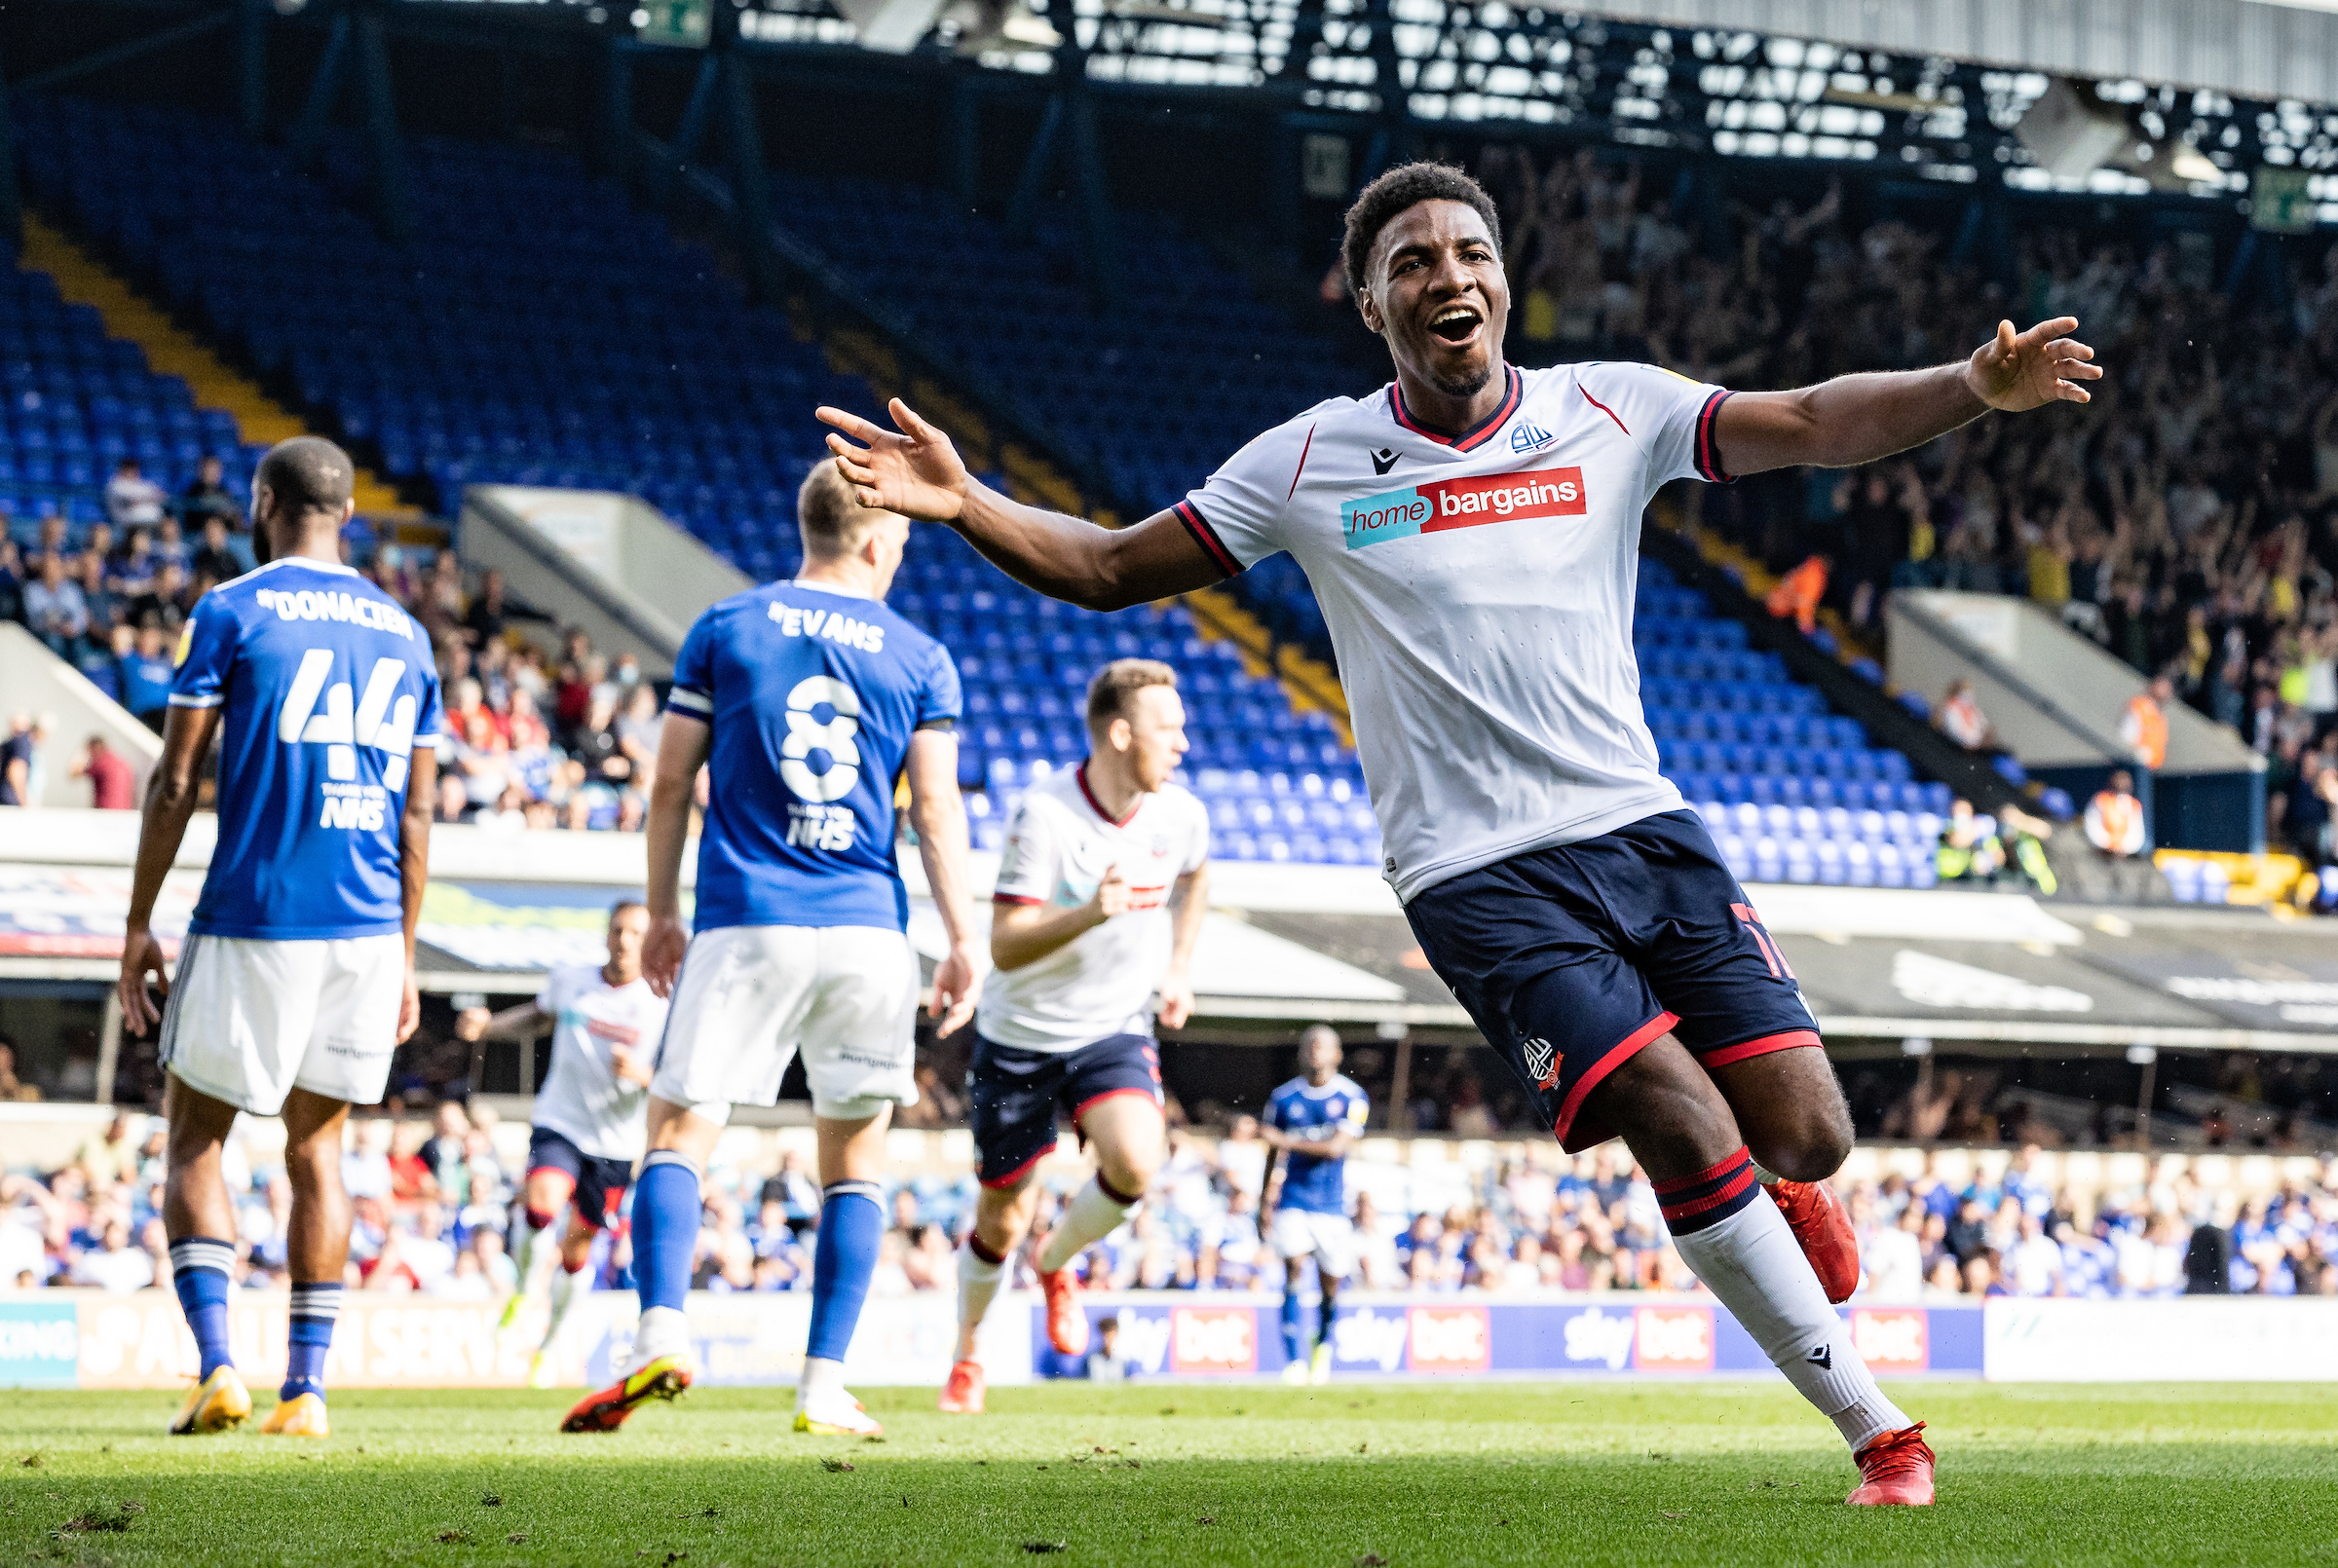 Bolton Wanderers fixtures: Key dates for the 2022/23 League One season